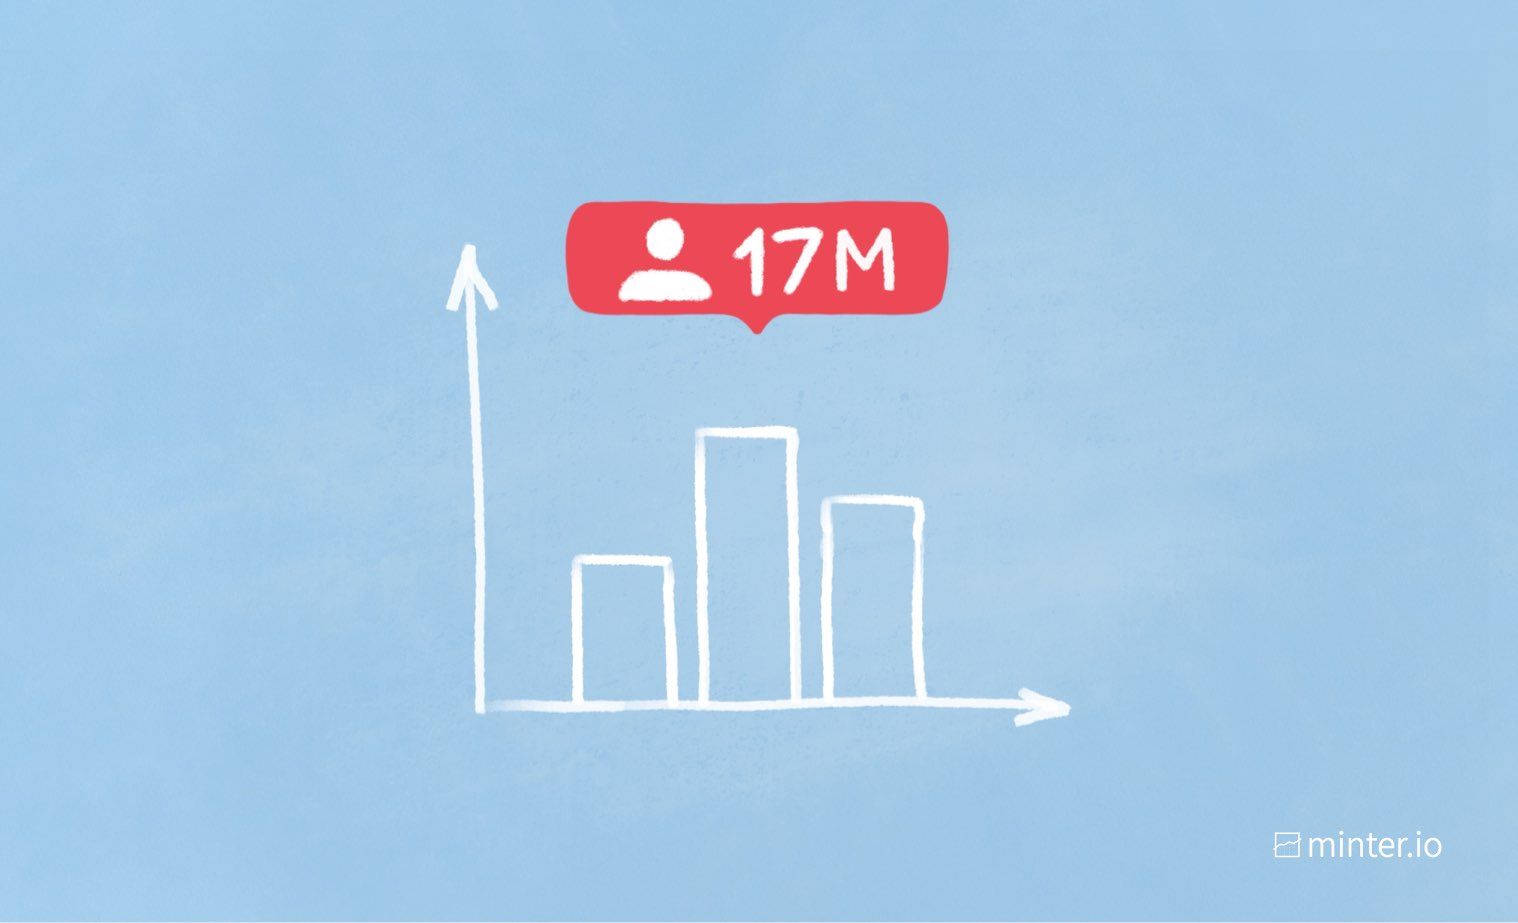 How to increase reach on social media